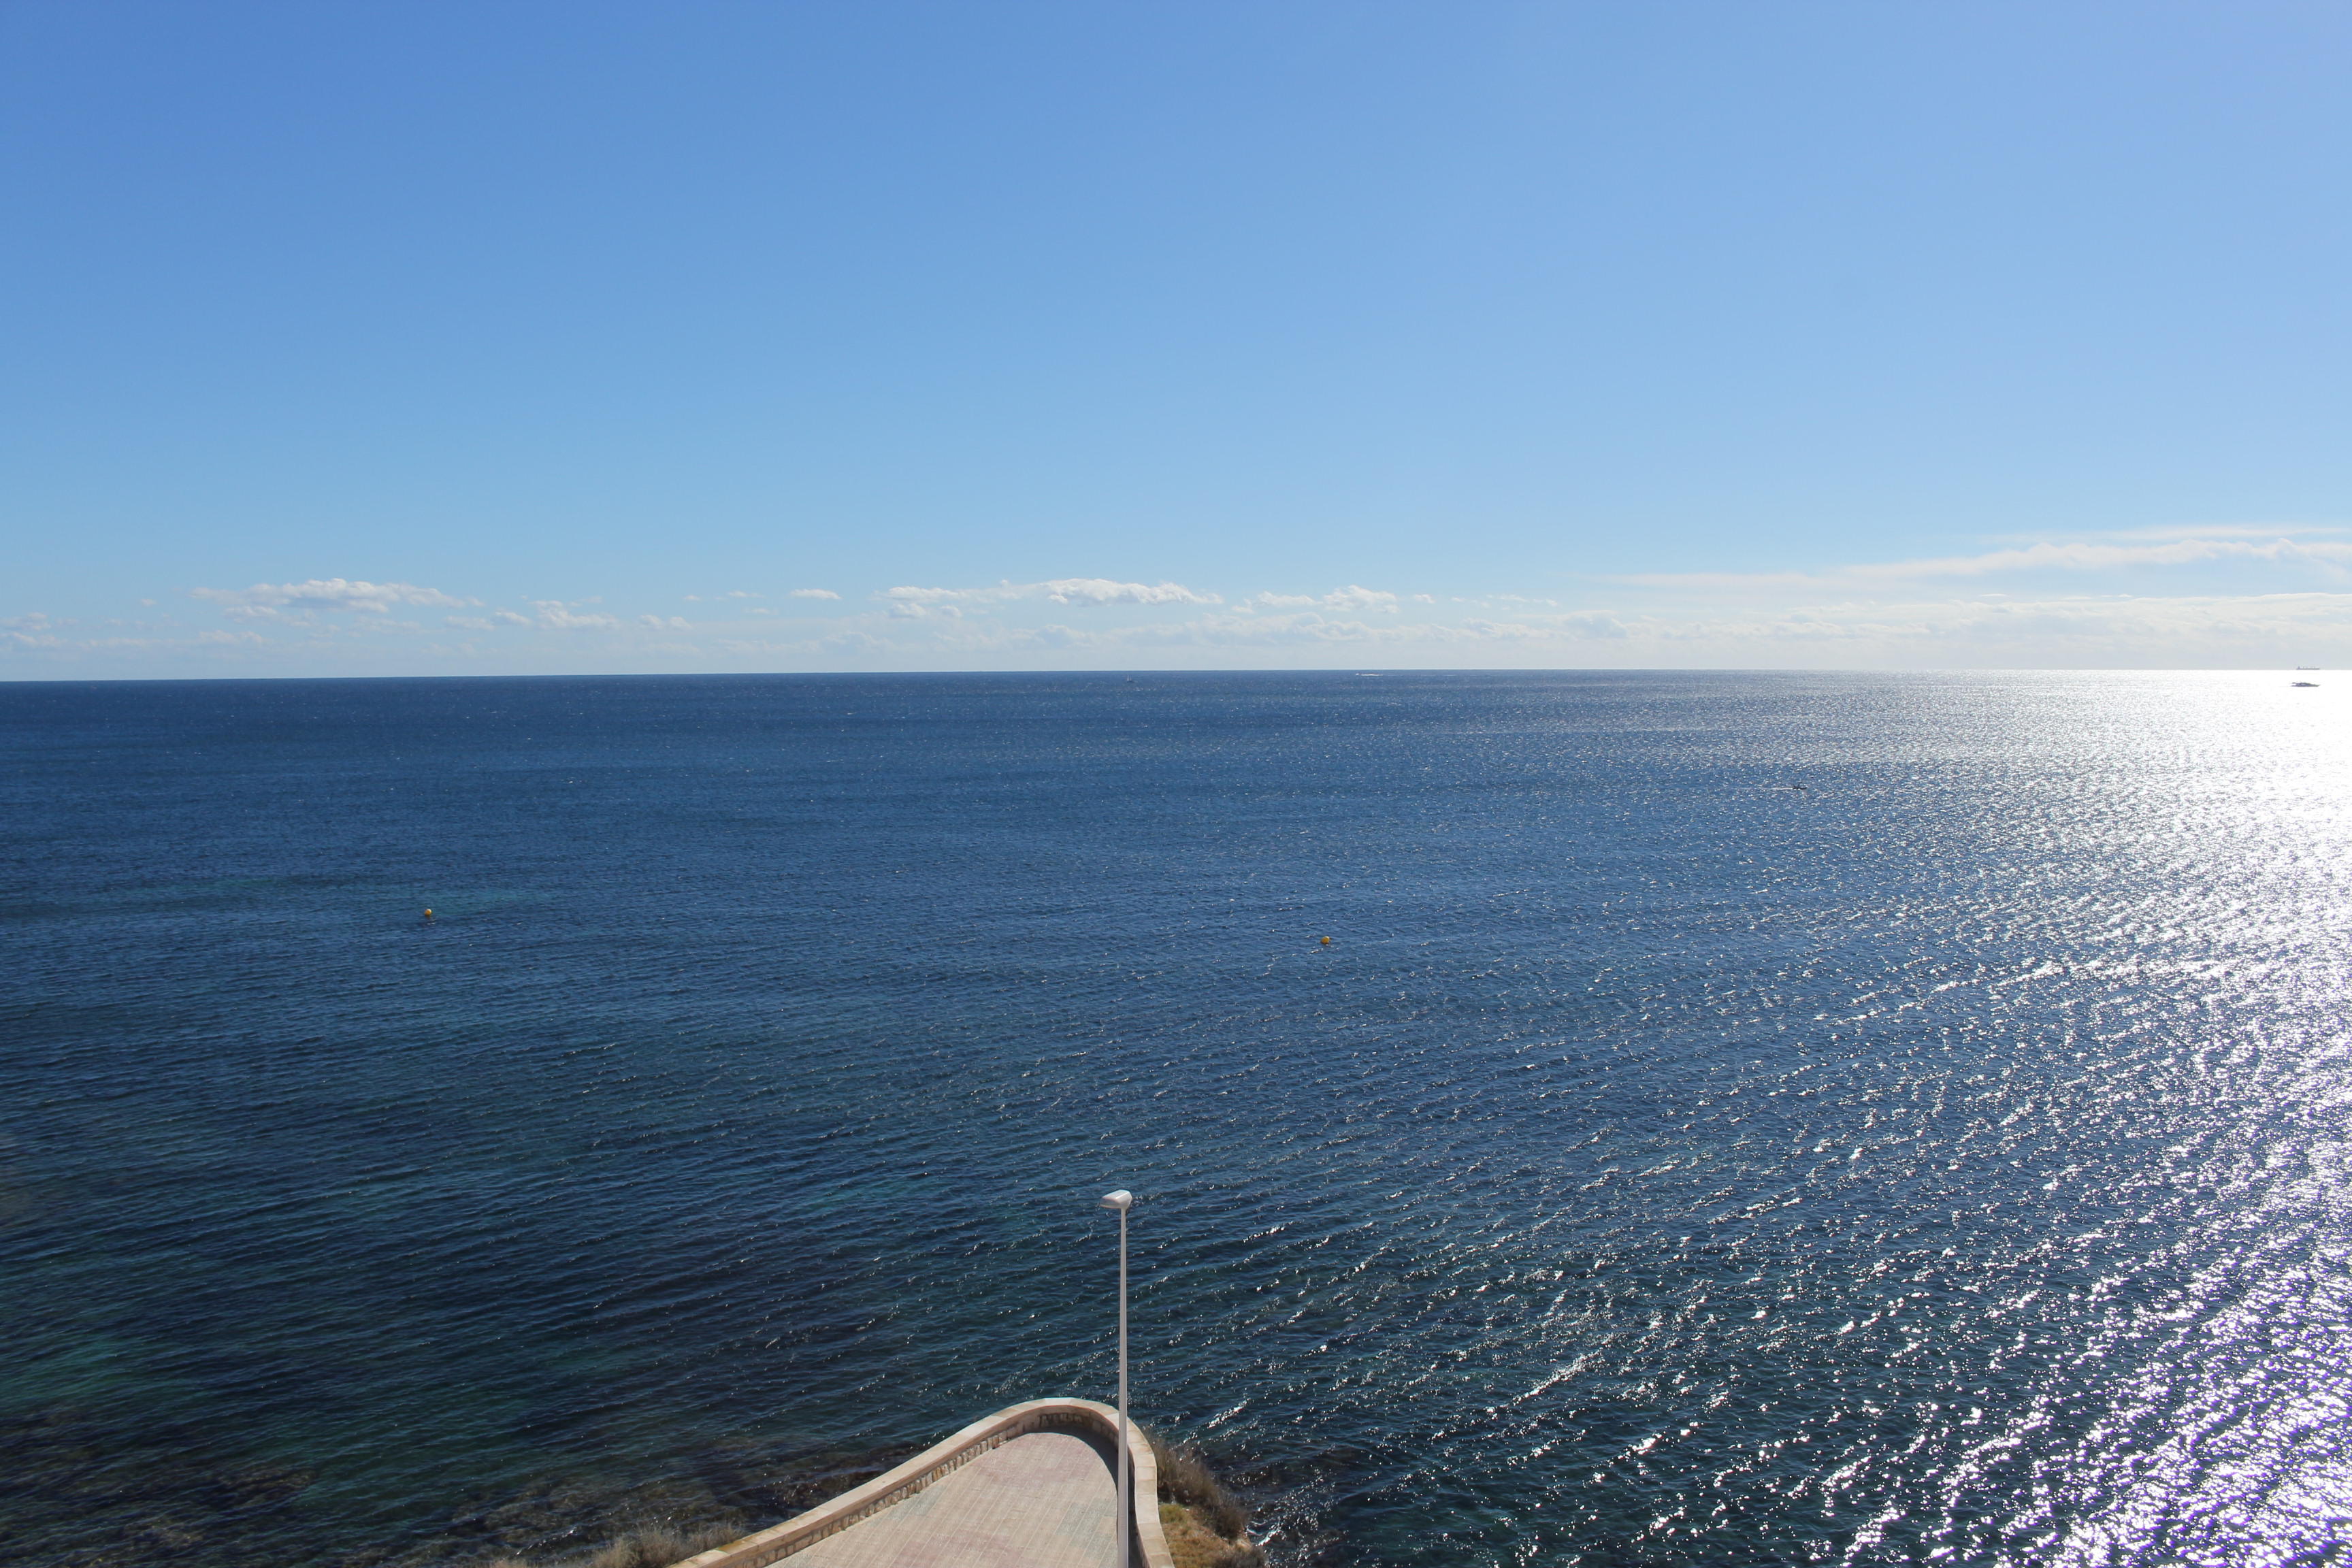 THE BEST LOCATION! PENTHOUSE WITH PANORAMIC SEA VIEWS